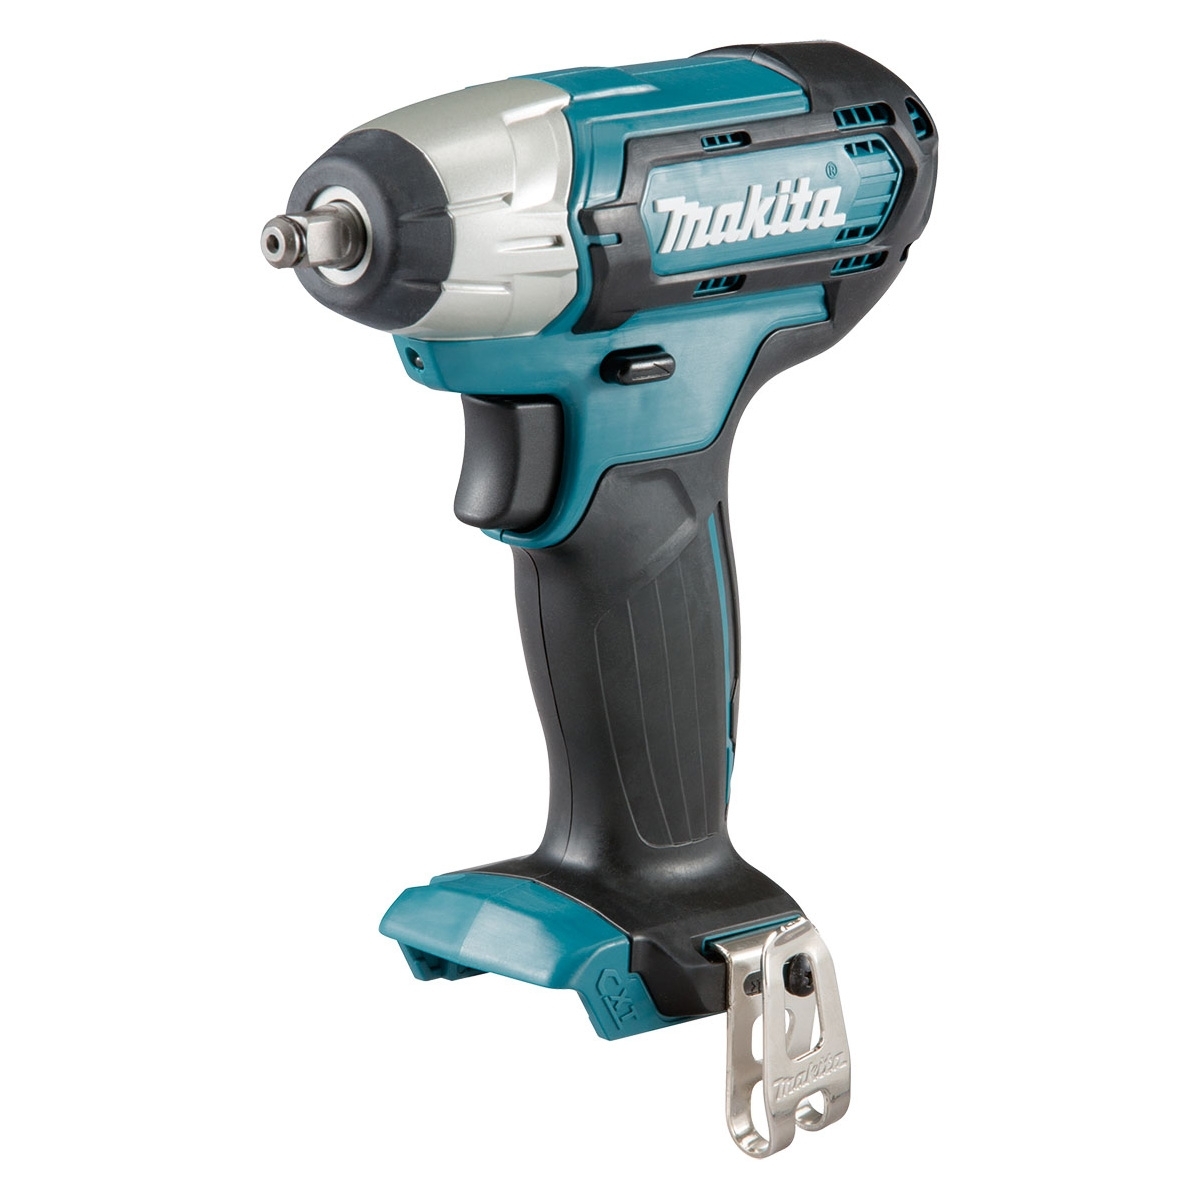 Makita 12V 3/8" Impact Wrench (tool only) TW140DZ